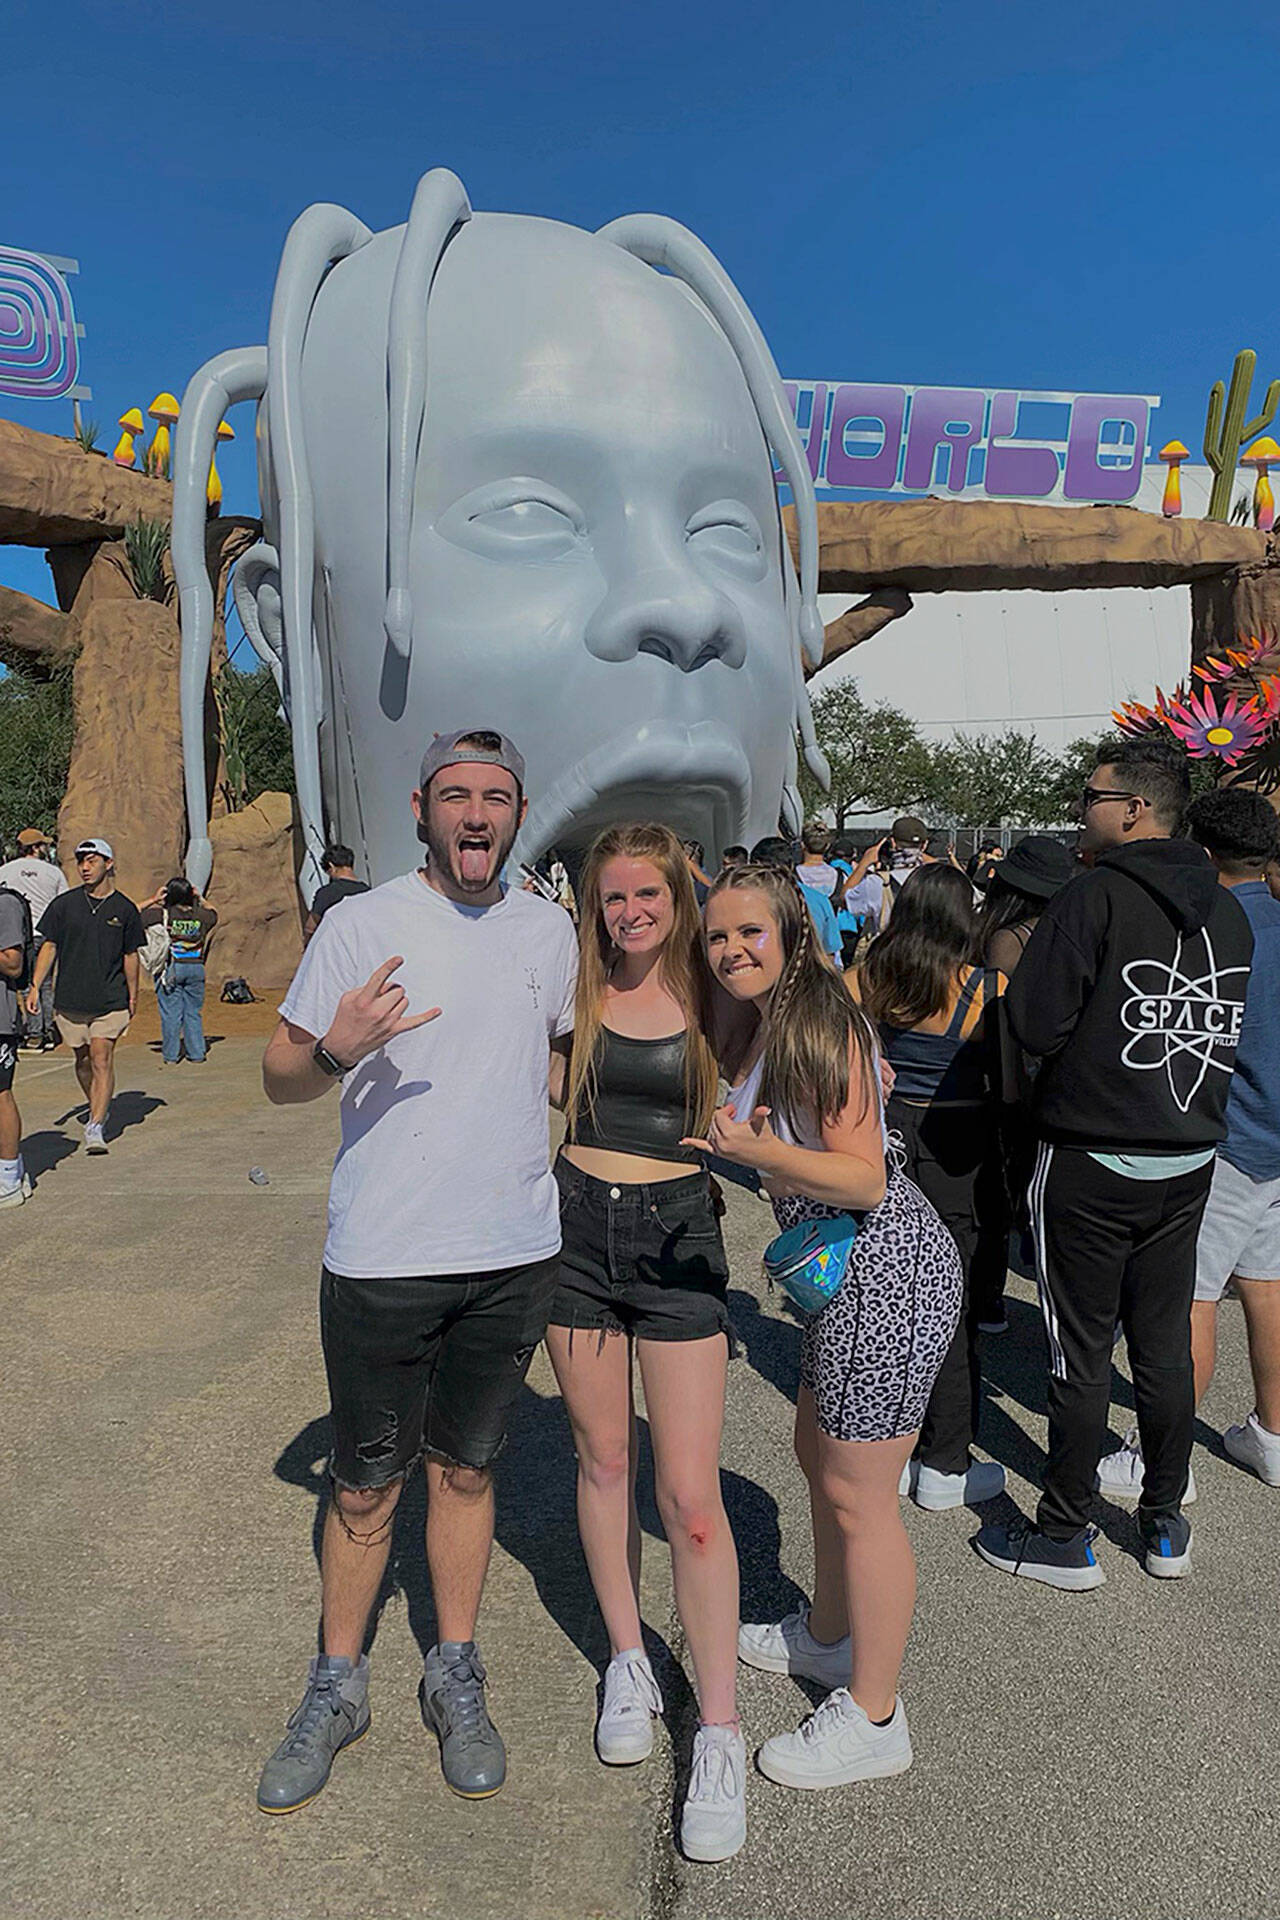 Sequim friends Cody Bell, Sam Smith and Natalie Thurston pose for a photo on the first day of Astroworld in Houston, Texas on Nov. 12. The trio would see multiple people be injured during the festival, which had 10 confirmed deaths as of Nov. 16. (Photo courtesy of Sam Smith)